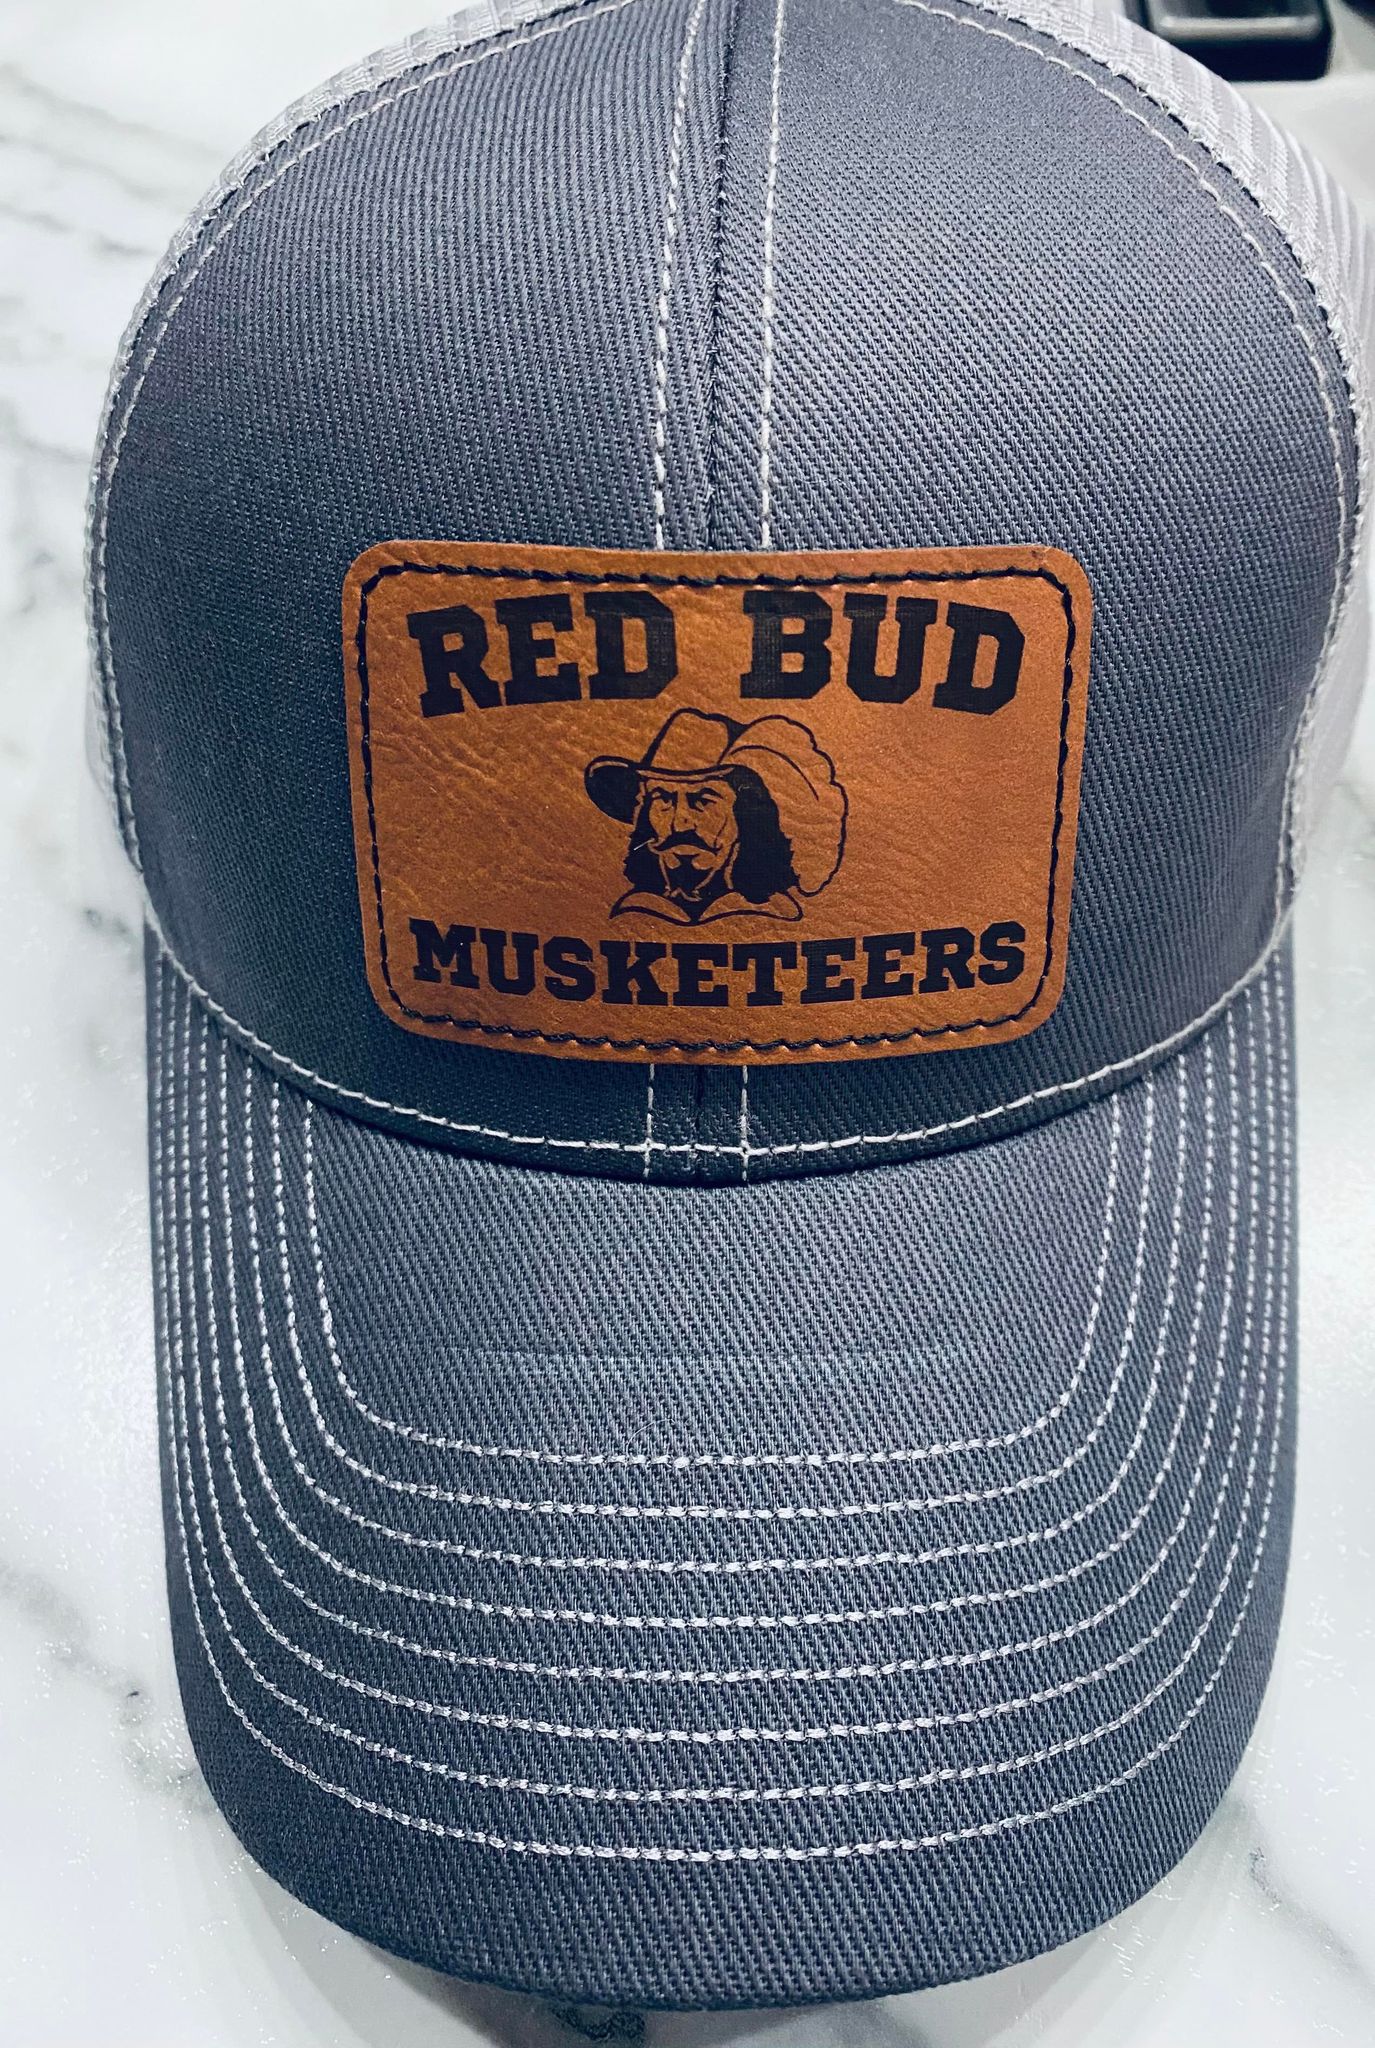 Ball Cap with Leather Musketeers